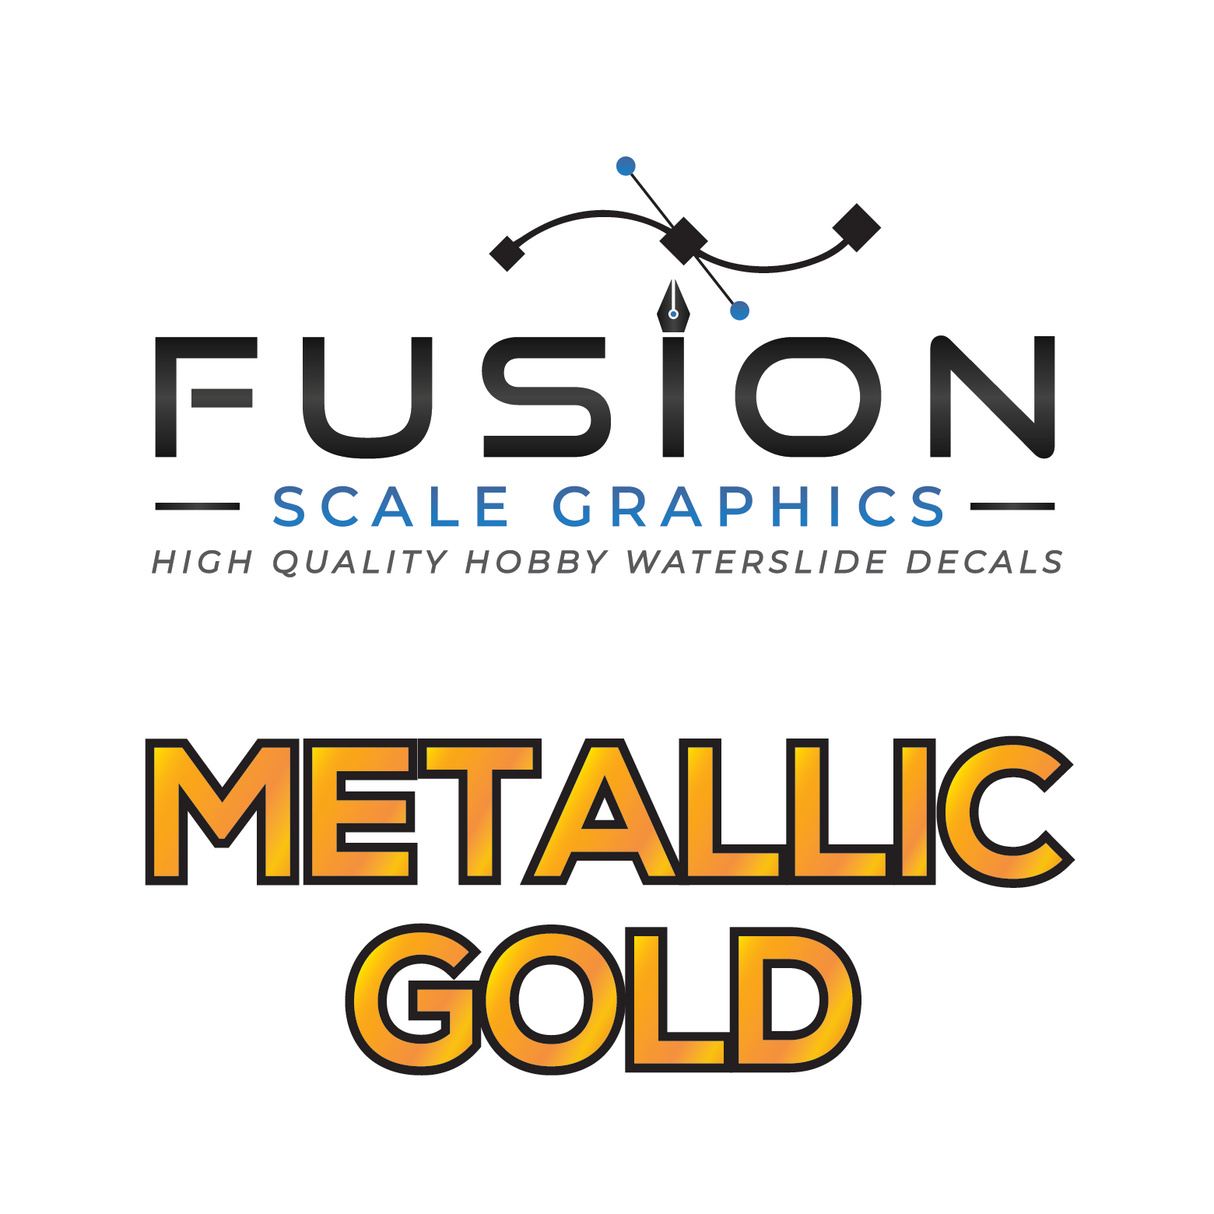 Fusion Scale Graphics Custom Metallic Gold Waterslide Decal Printing Quarter Sheet A6